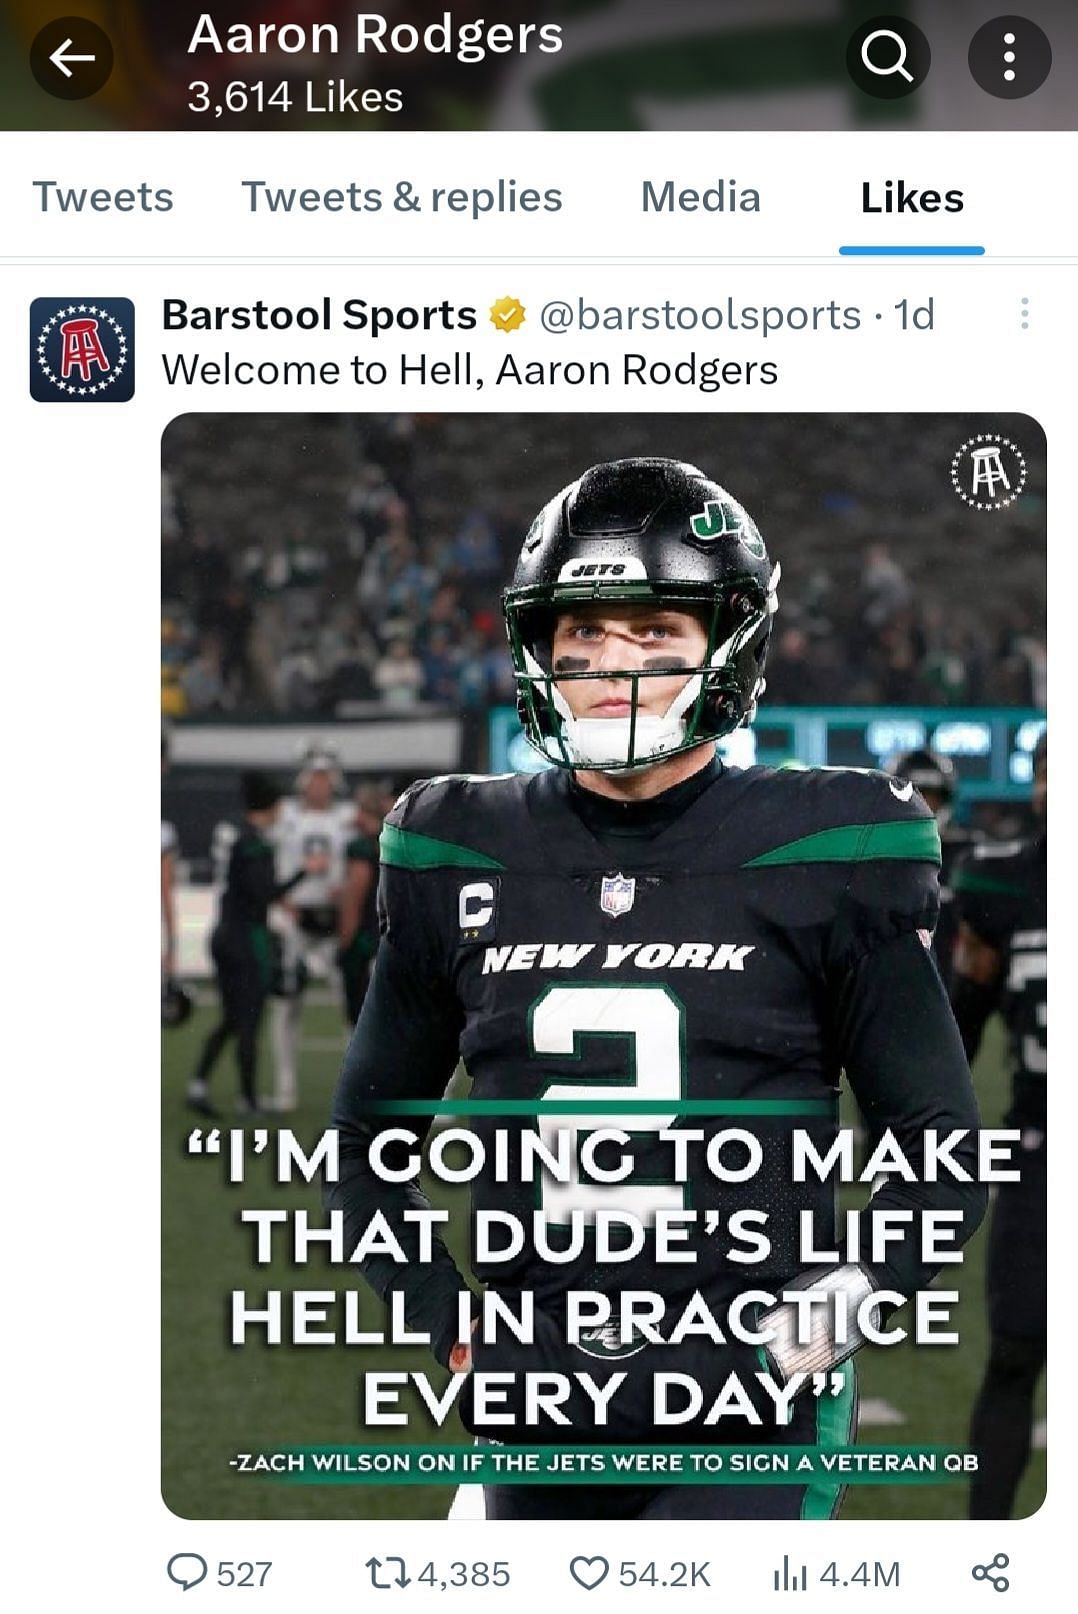 Aaron Rodgers liked Barstool Sports&#039; tweet about Zach Wilson&#039;s quote for the new Jets quarterback.